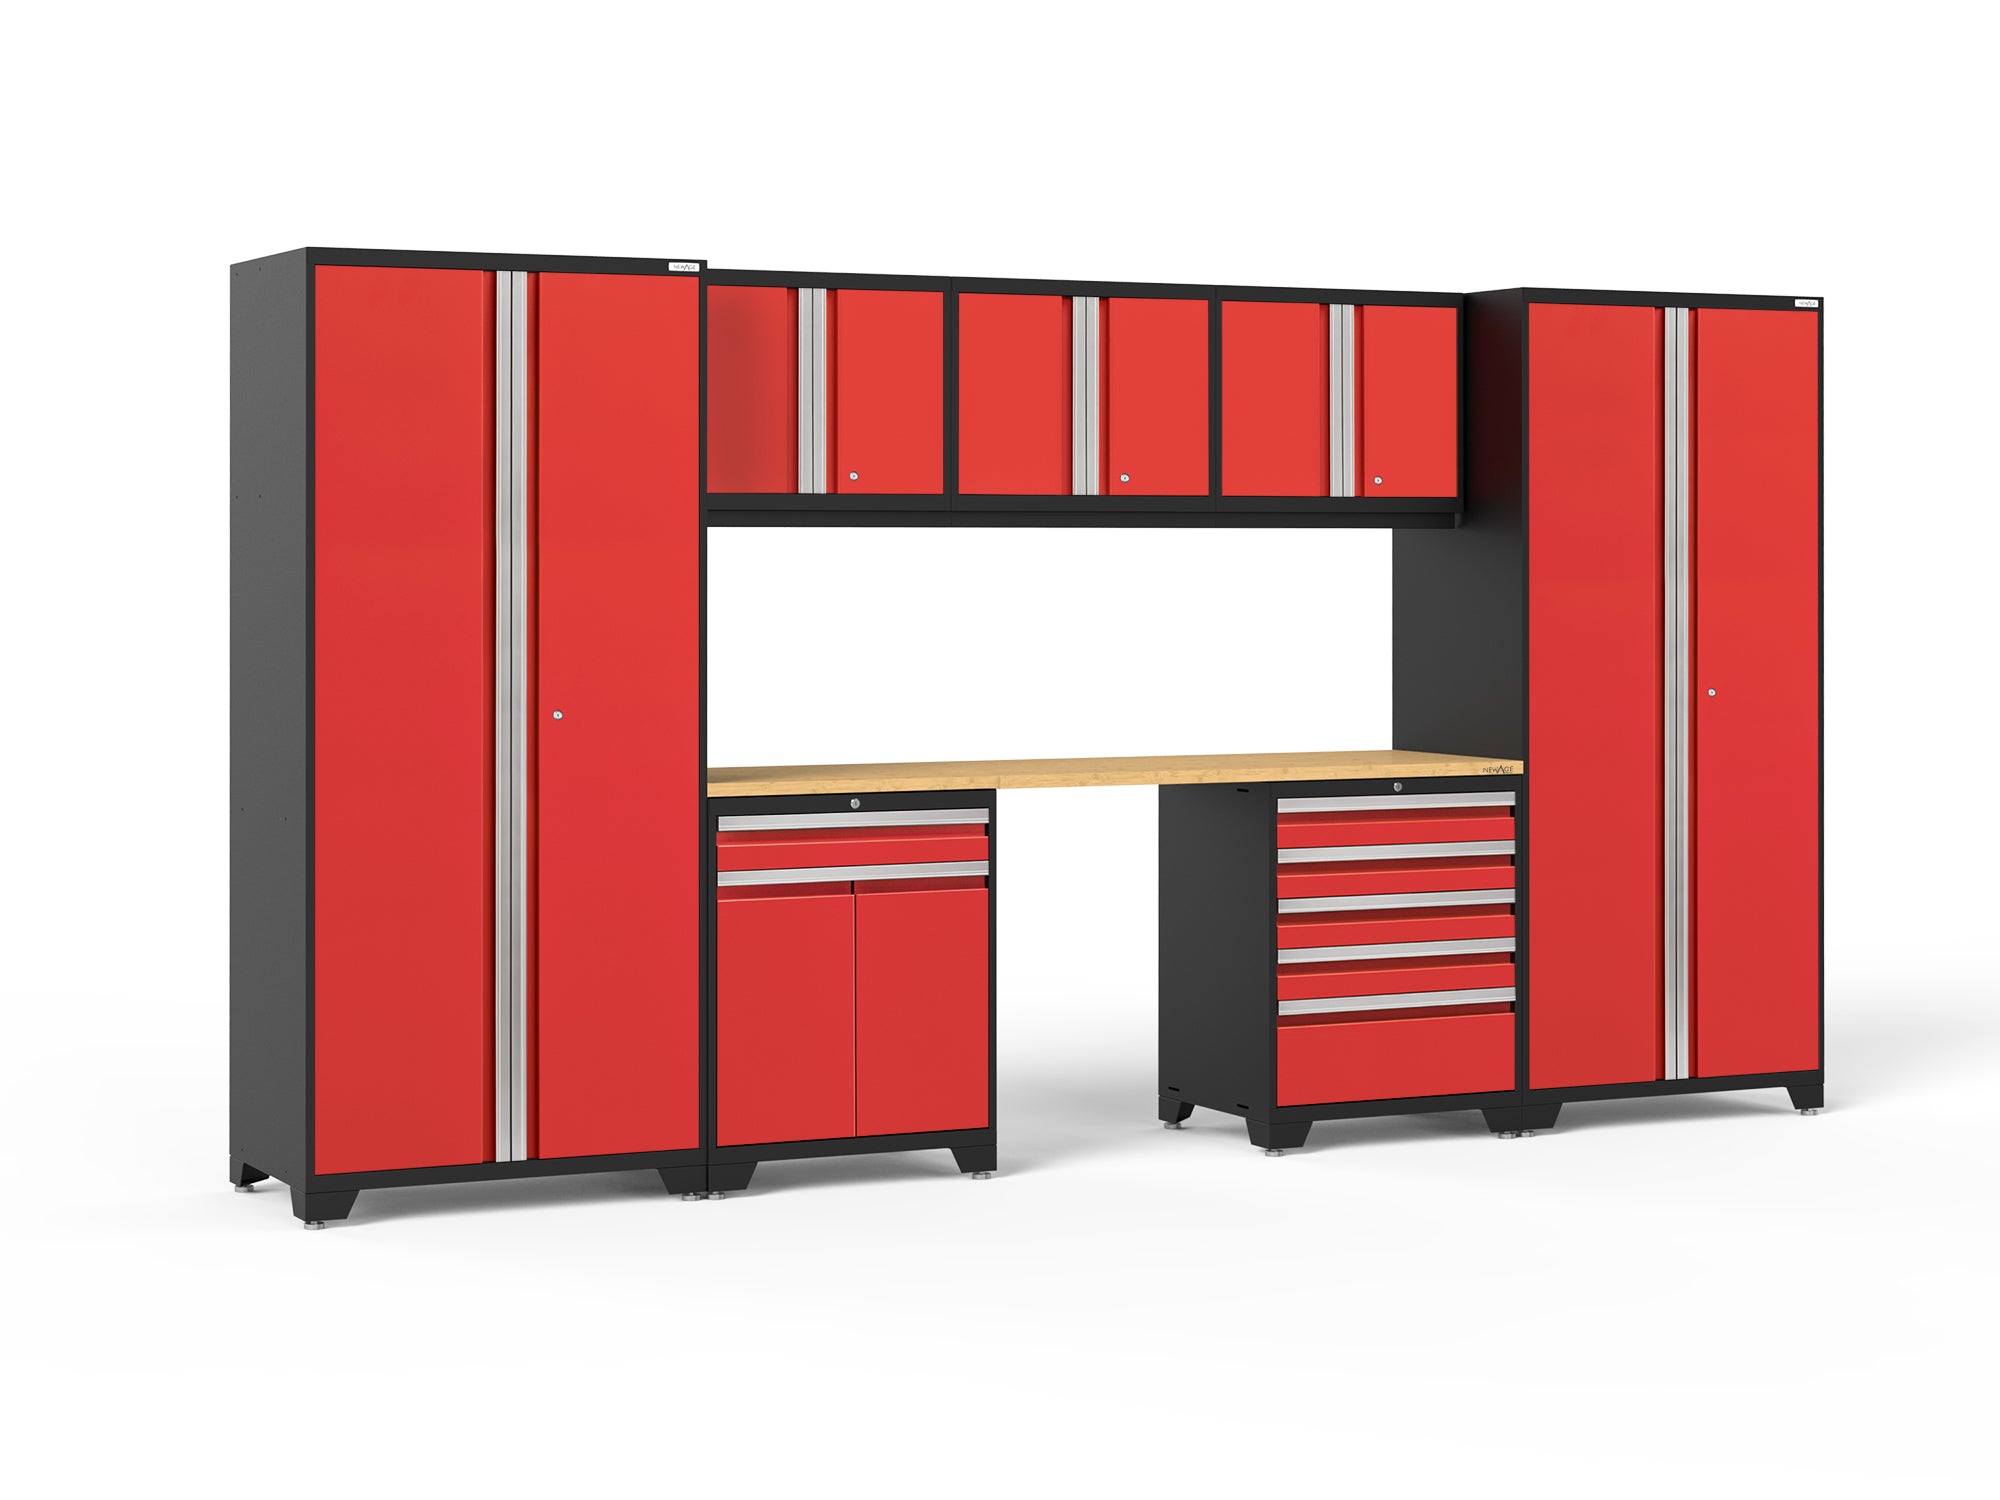 NewAge Pro Series 8 Piece Cabinet Set with Wall, Tool Drawer, Multi-Function Cabinet, Lockers and 84 in. Worktop